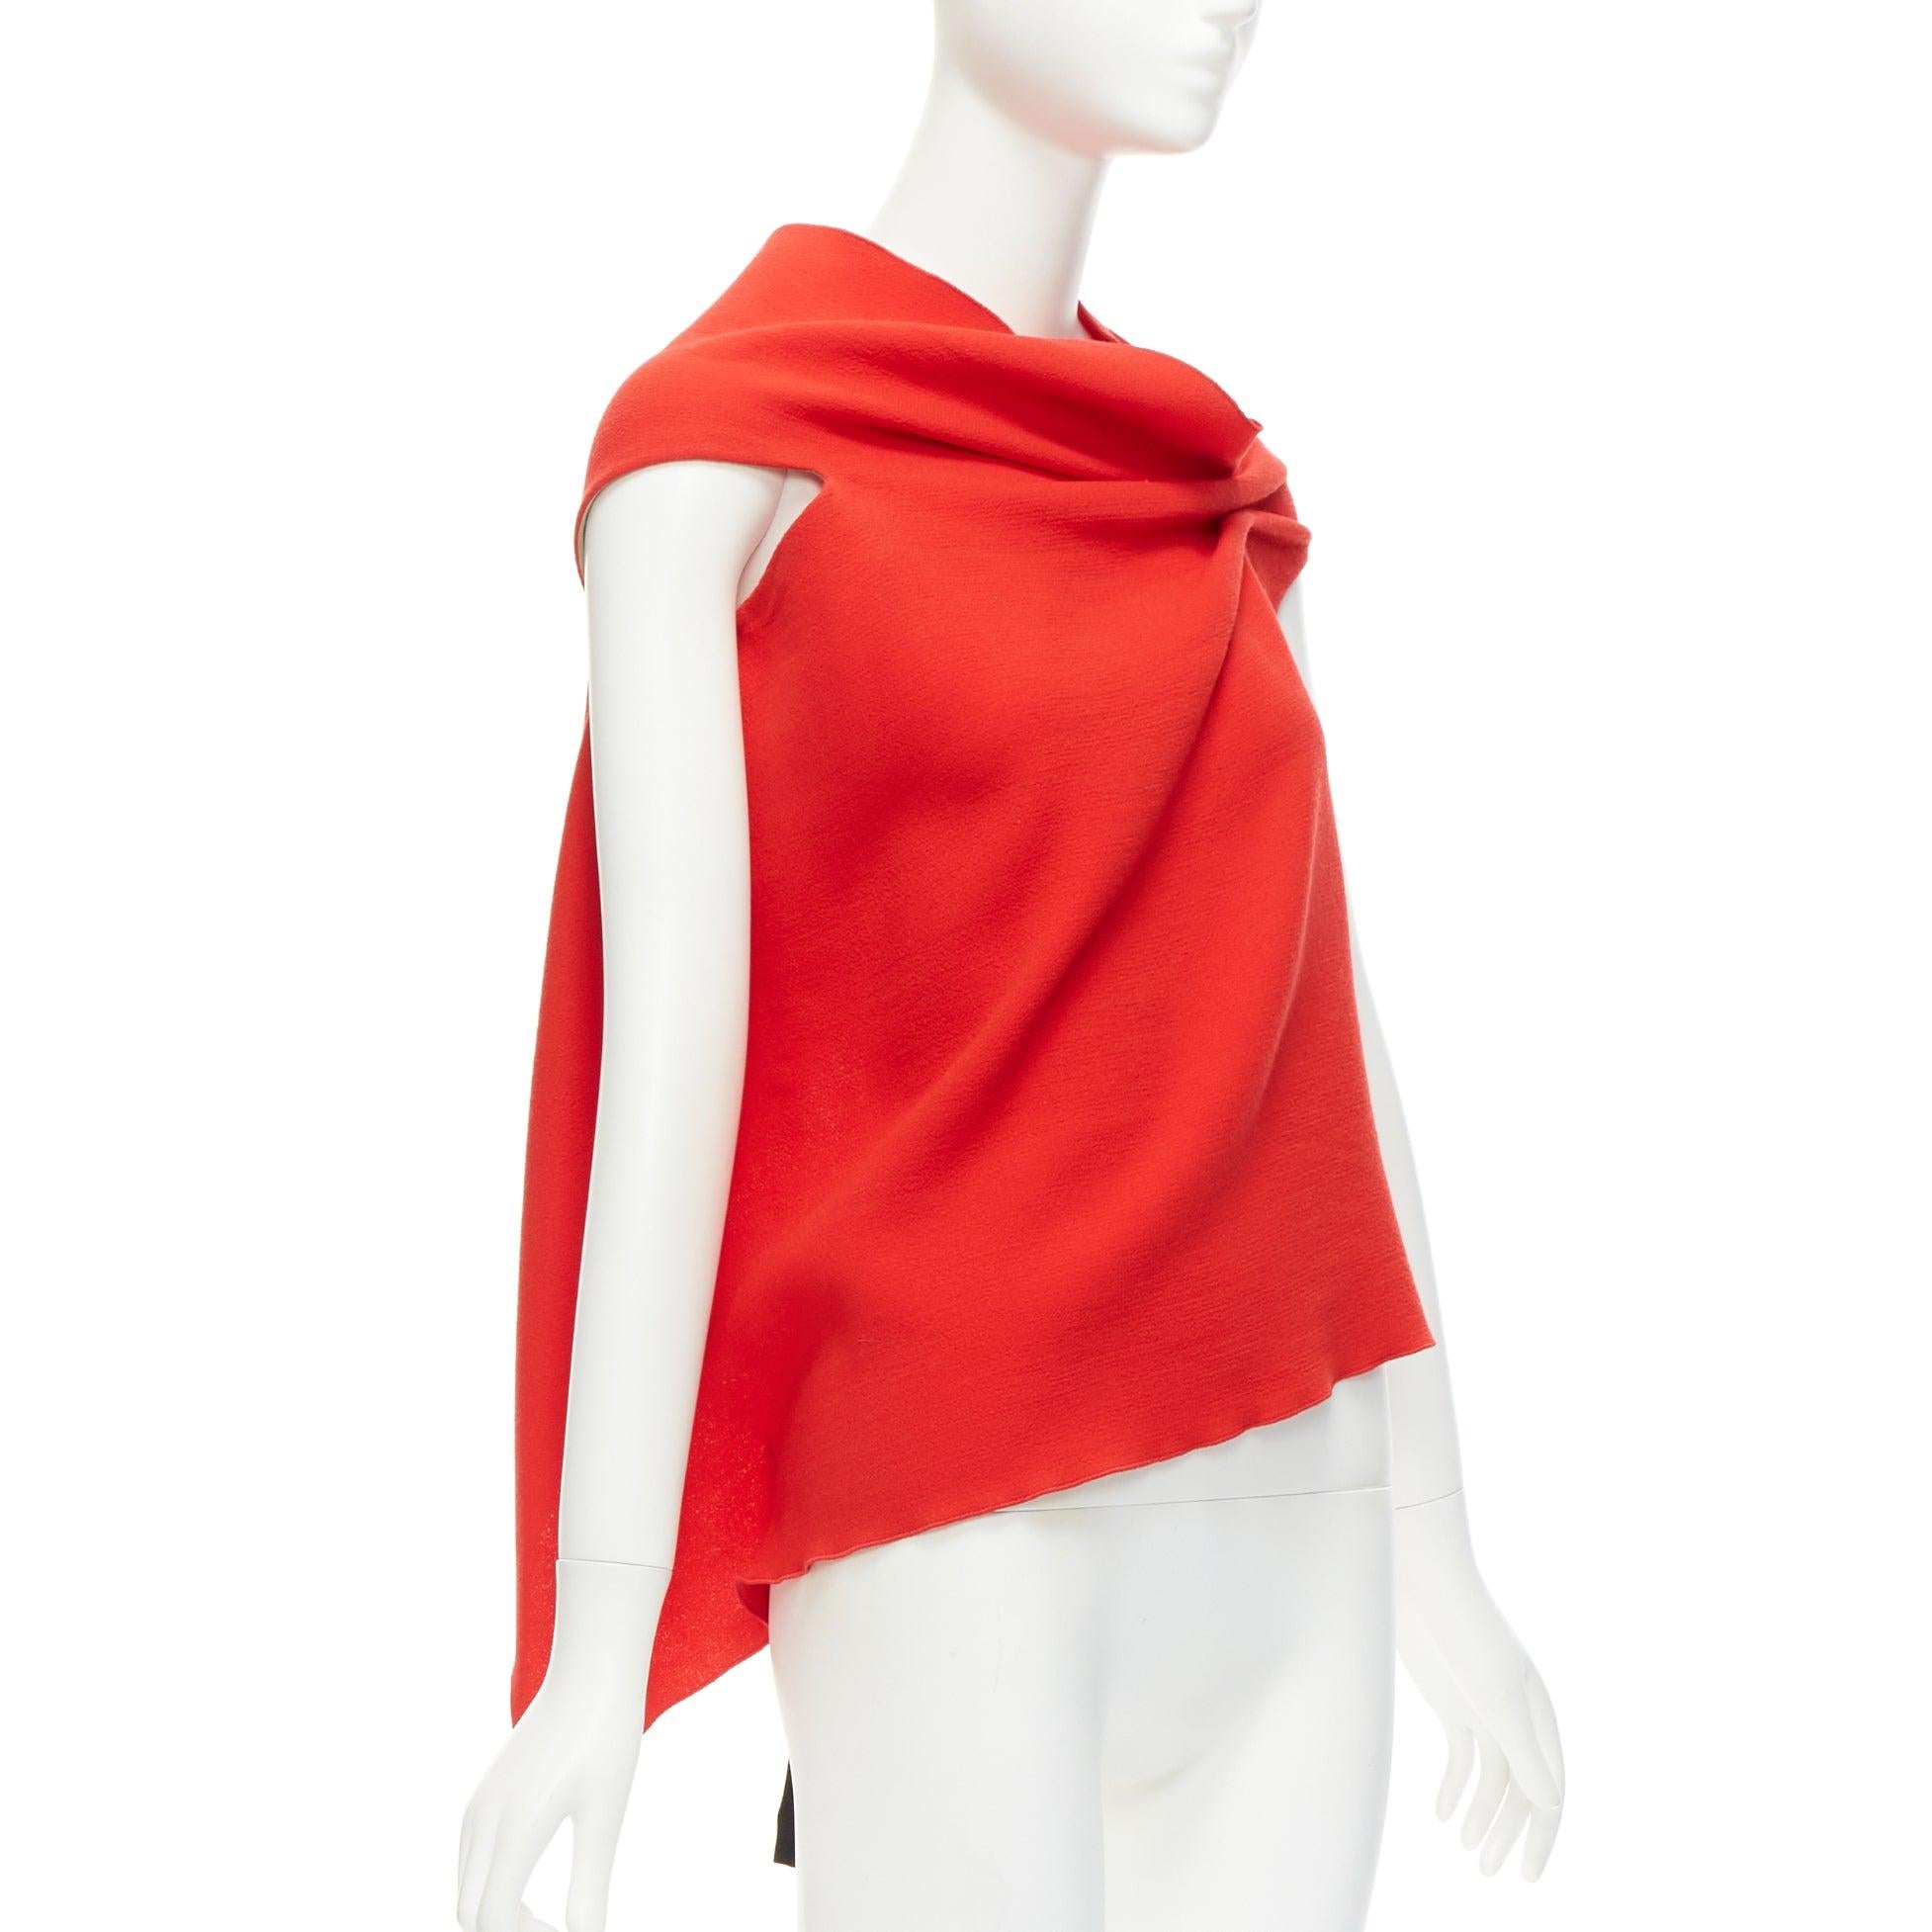 ROLAND MOURET Eugene wool origami folds black tie back cut out top UK6 XS
Reference: MAFK/A00013
Brand: Roland Mouret
Model: Eugene
Material: Wool
Color: Red
Pattern: Solid
Closure: Self Tie
Extra Details: Cut out back with black tie. Beautifuly